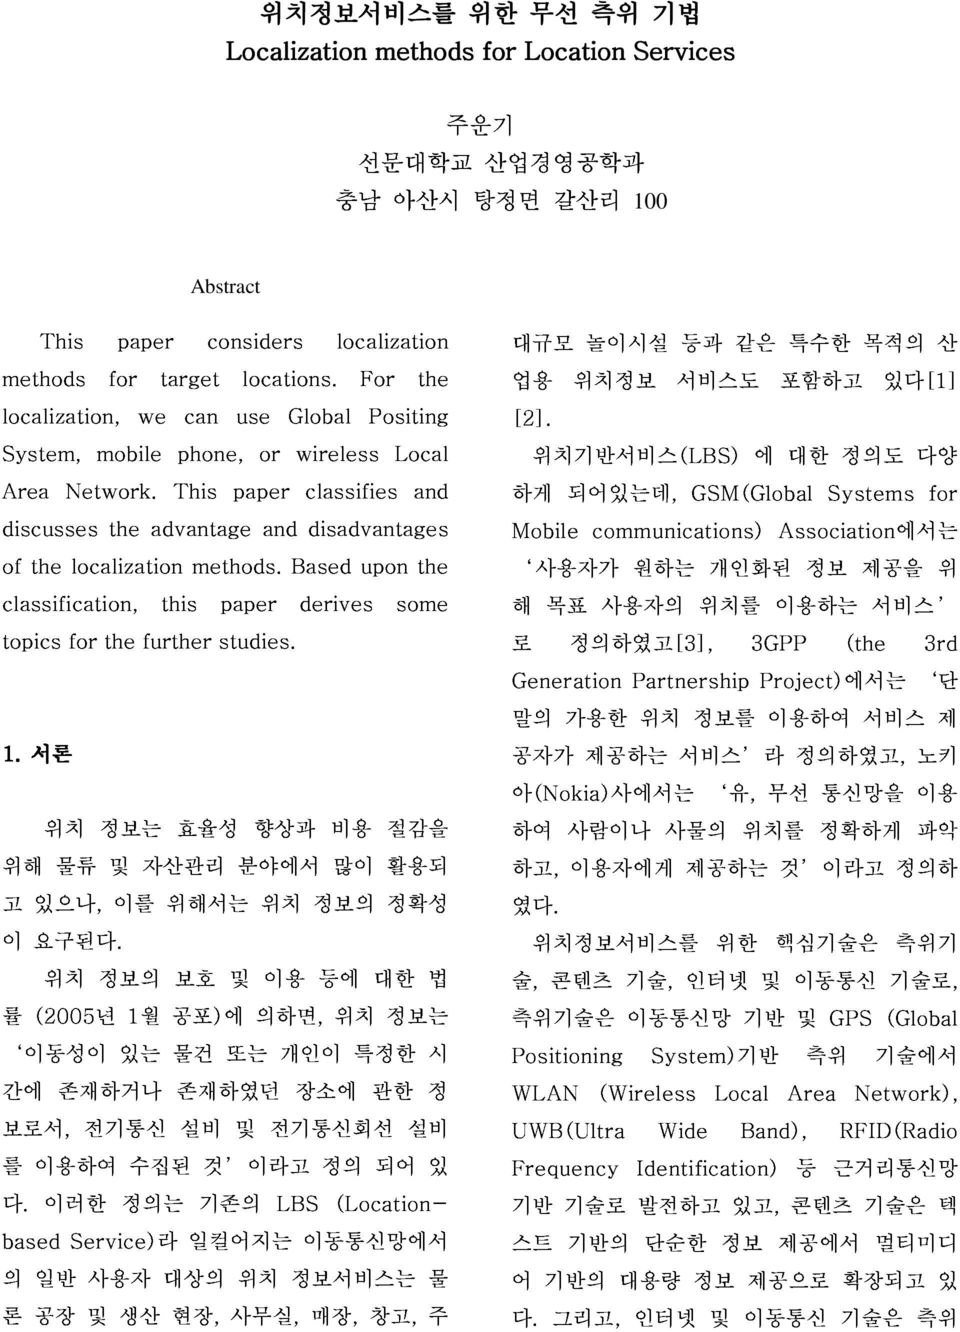 paper and Based classifies disadvantages upon and [2]. 서비스도 포함하고 있다[1] classification, topics for the further this studies.